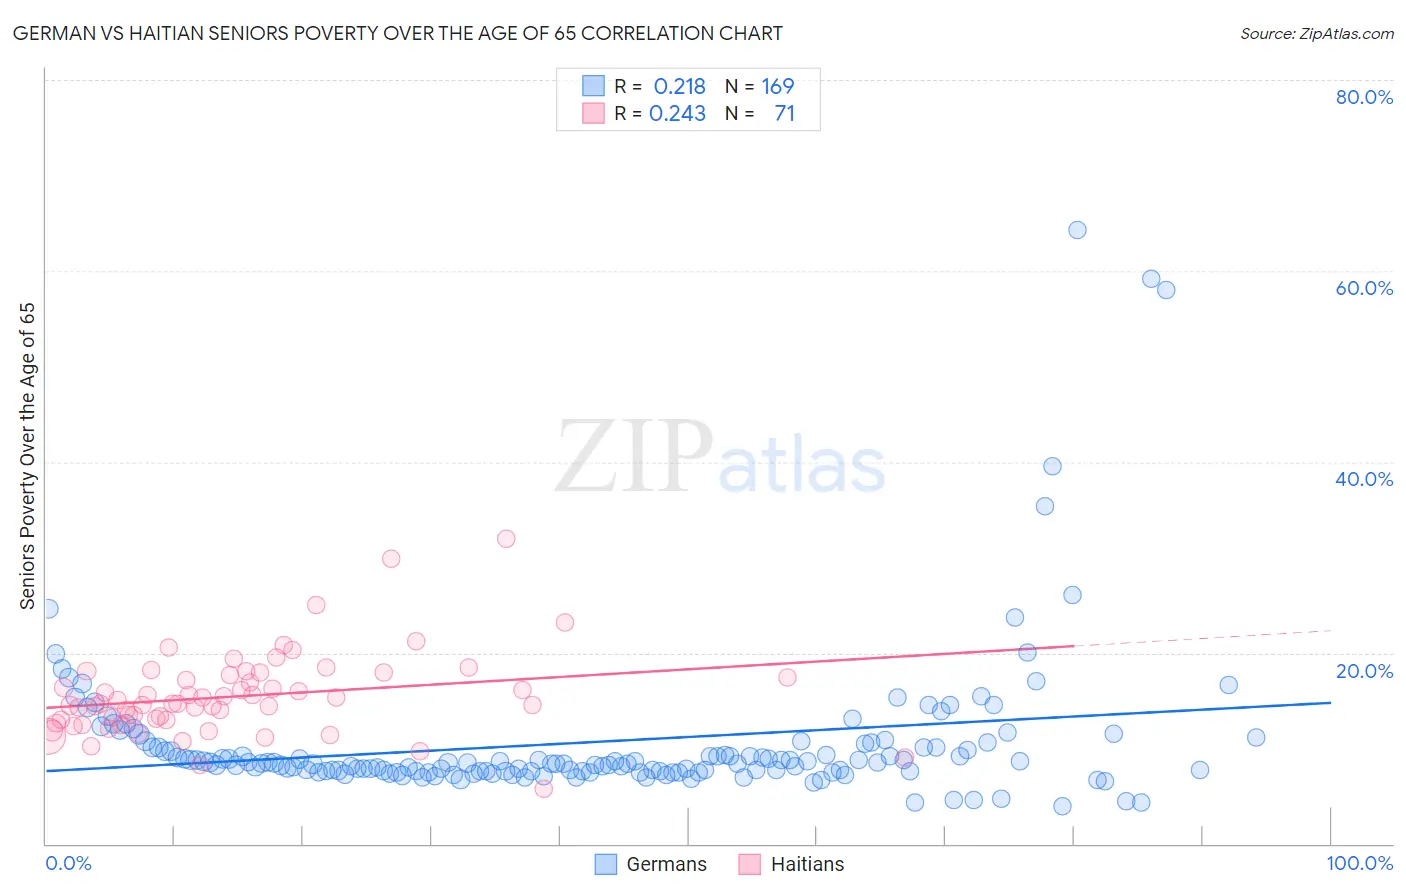 German vs Haitian Seniors Poverty Over the Age of 65